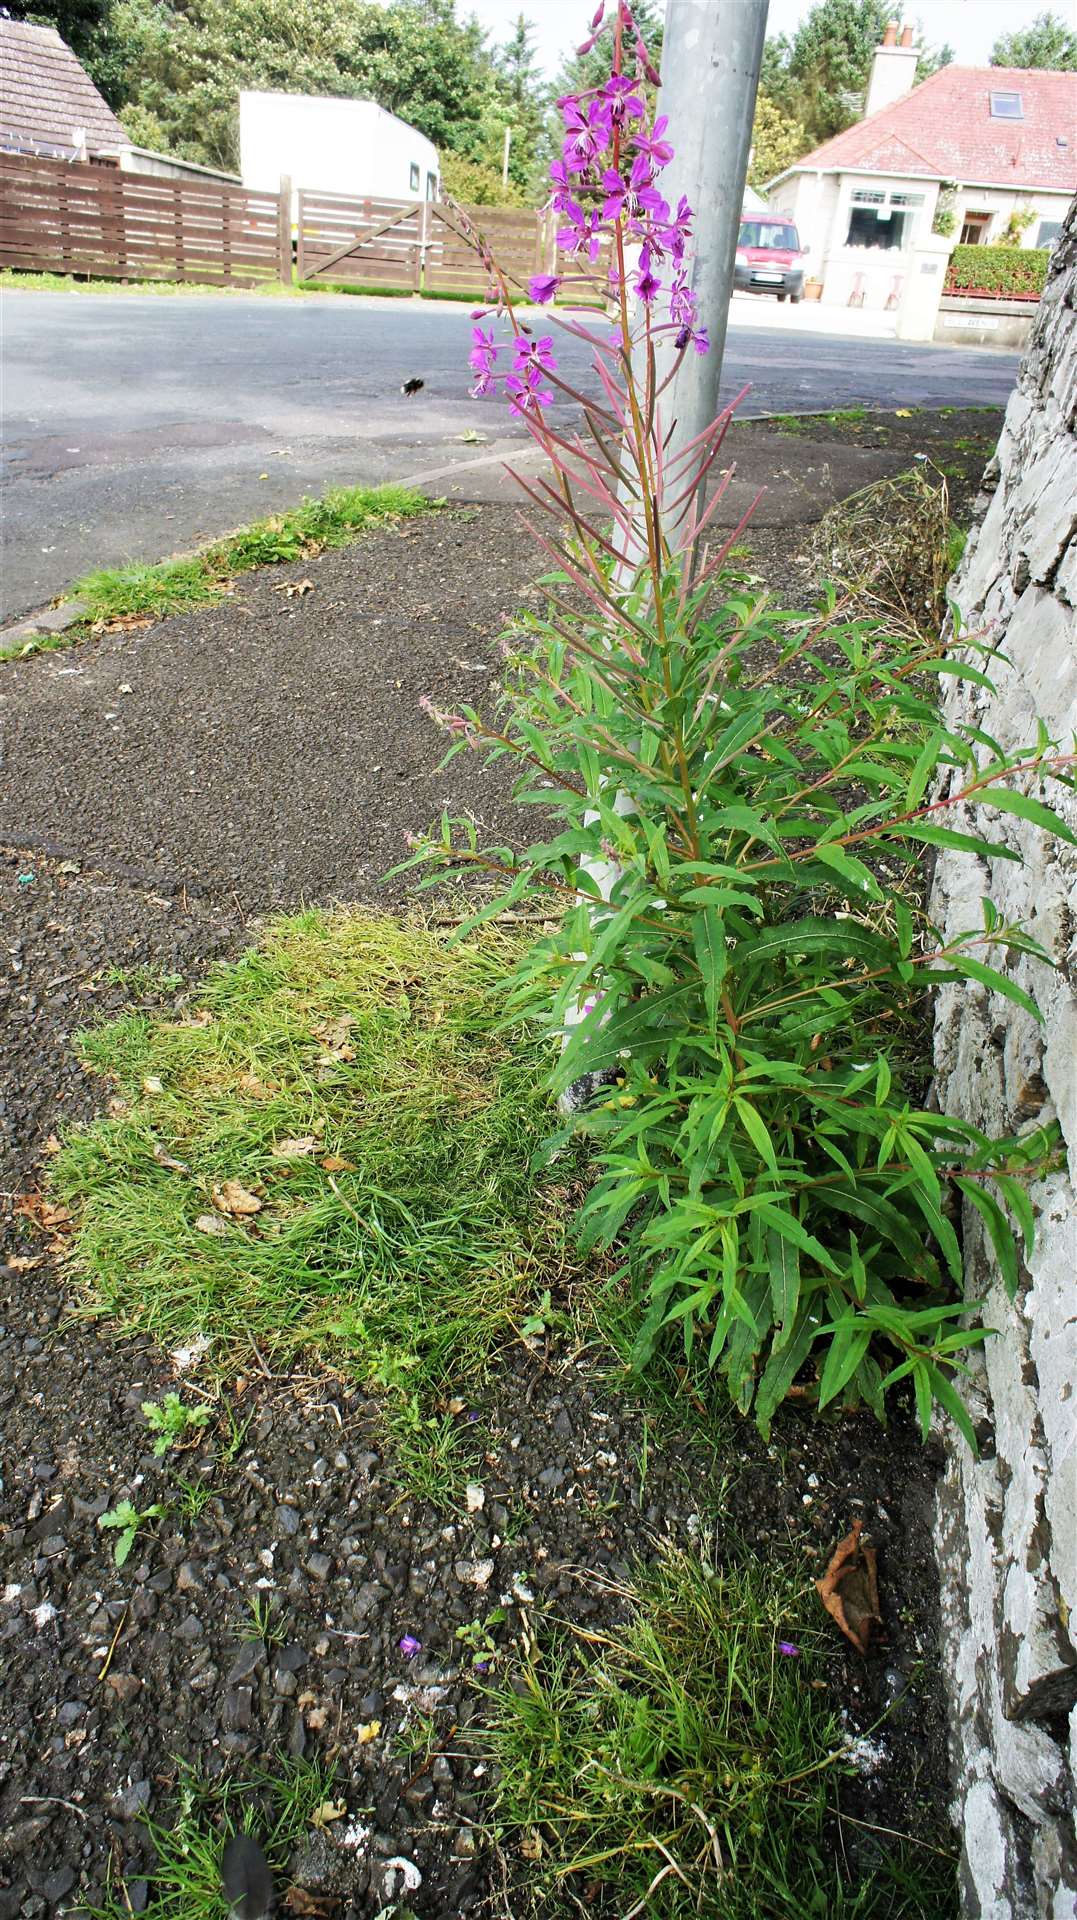 A large weed in bloom at the corner of Hill Avenue and George Street in Wick.